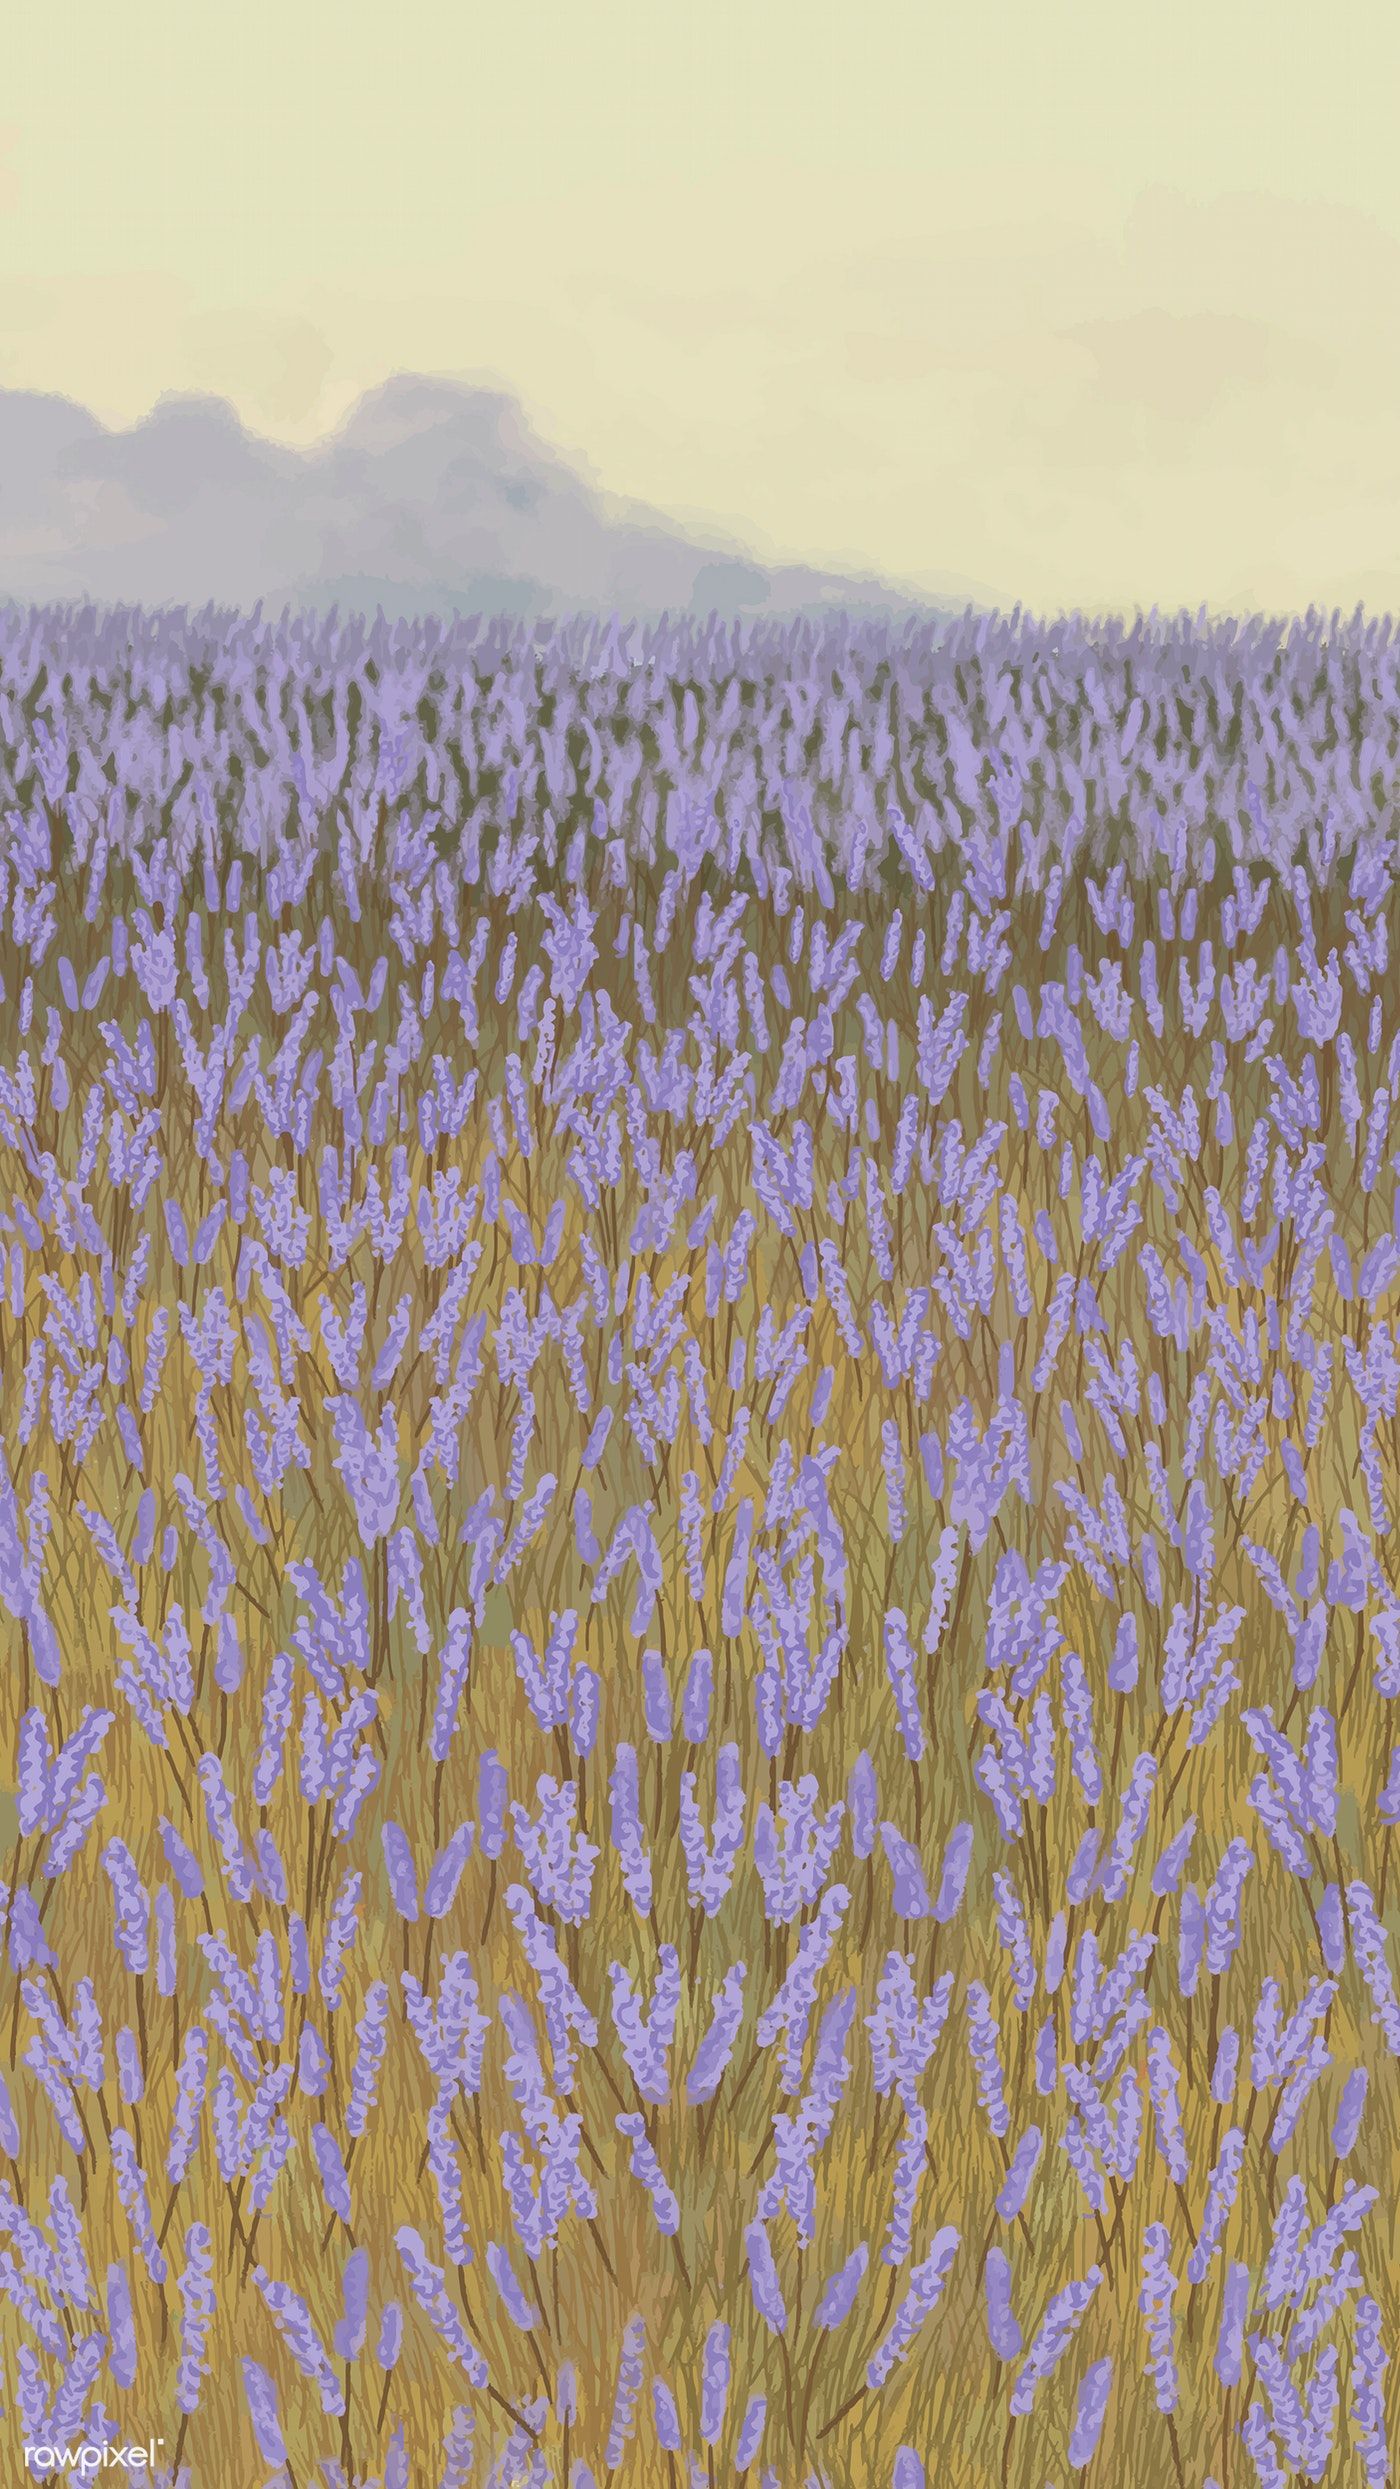 Wallpaper ID 368154  Earth Lavender Phone Wallpaper Flower Nature  Landscape Spring Field 1080x2280 free download